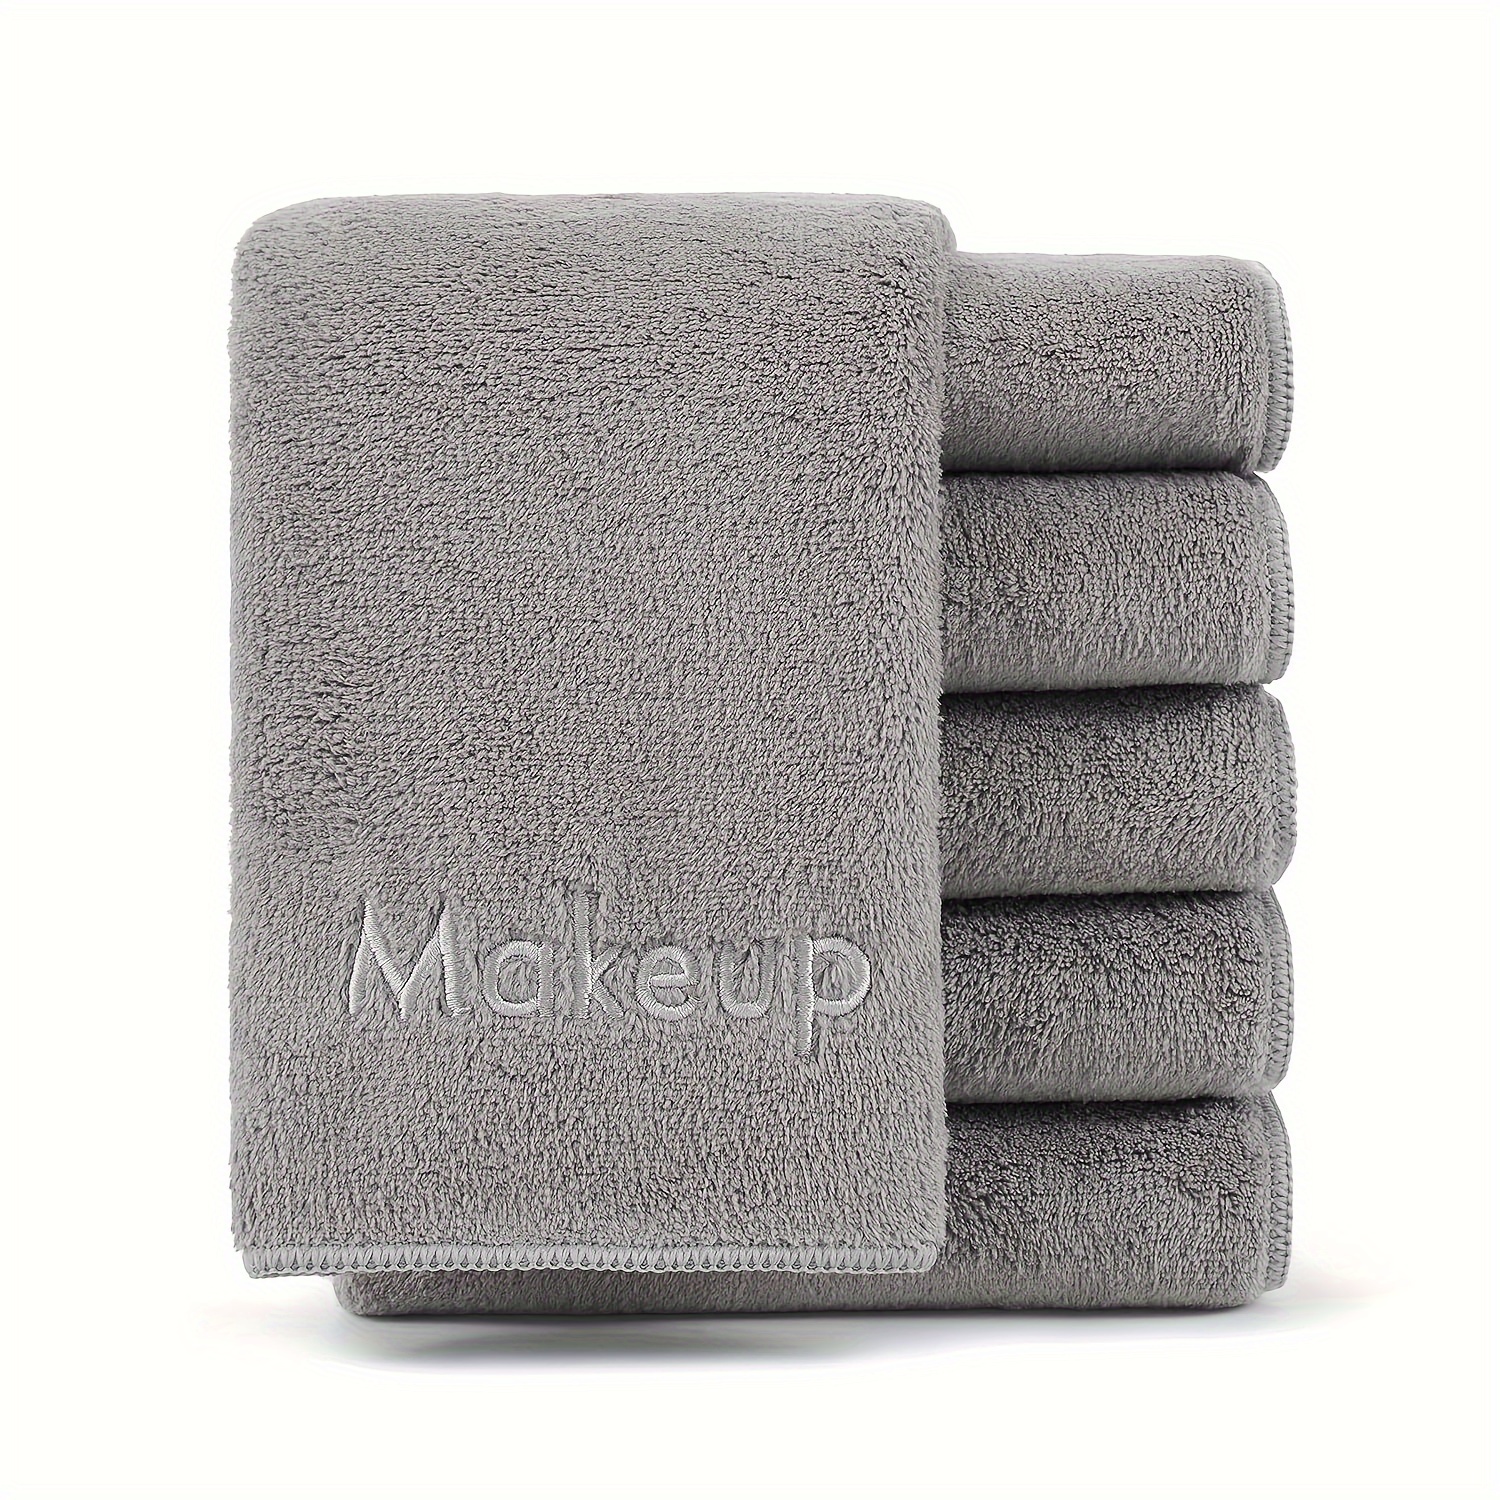 

5/10pcs, Makeup Remover Wash Cloth - Soft Coral Fleece Microfiber Fingertip Face Towel Washcloths For Hand And Make Up, Facial Towel, Household Washing Towel, Cleaning Supplies, Cleaning Tool